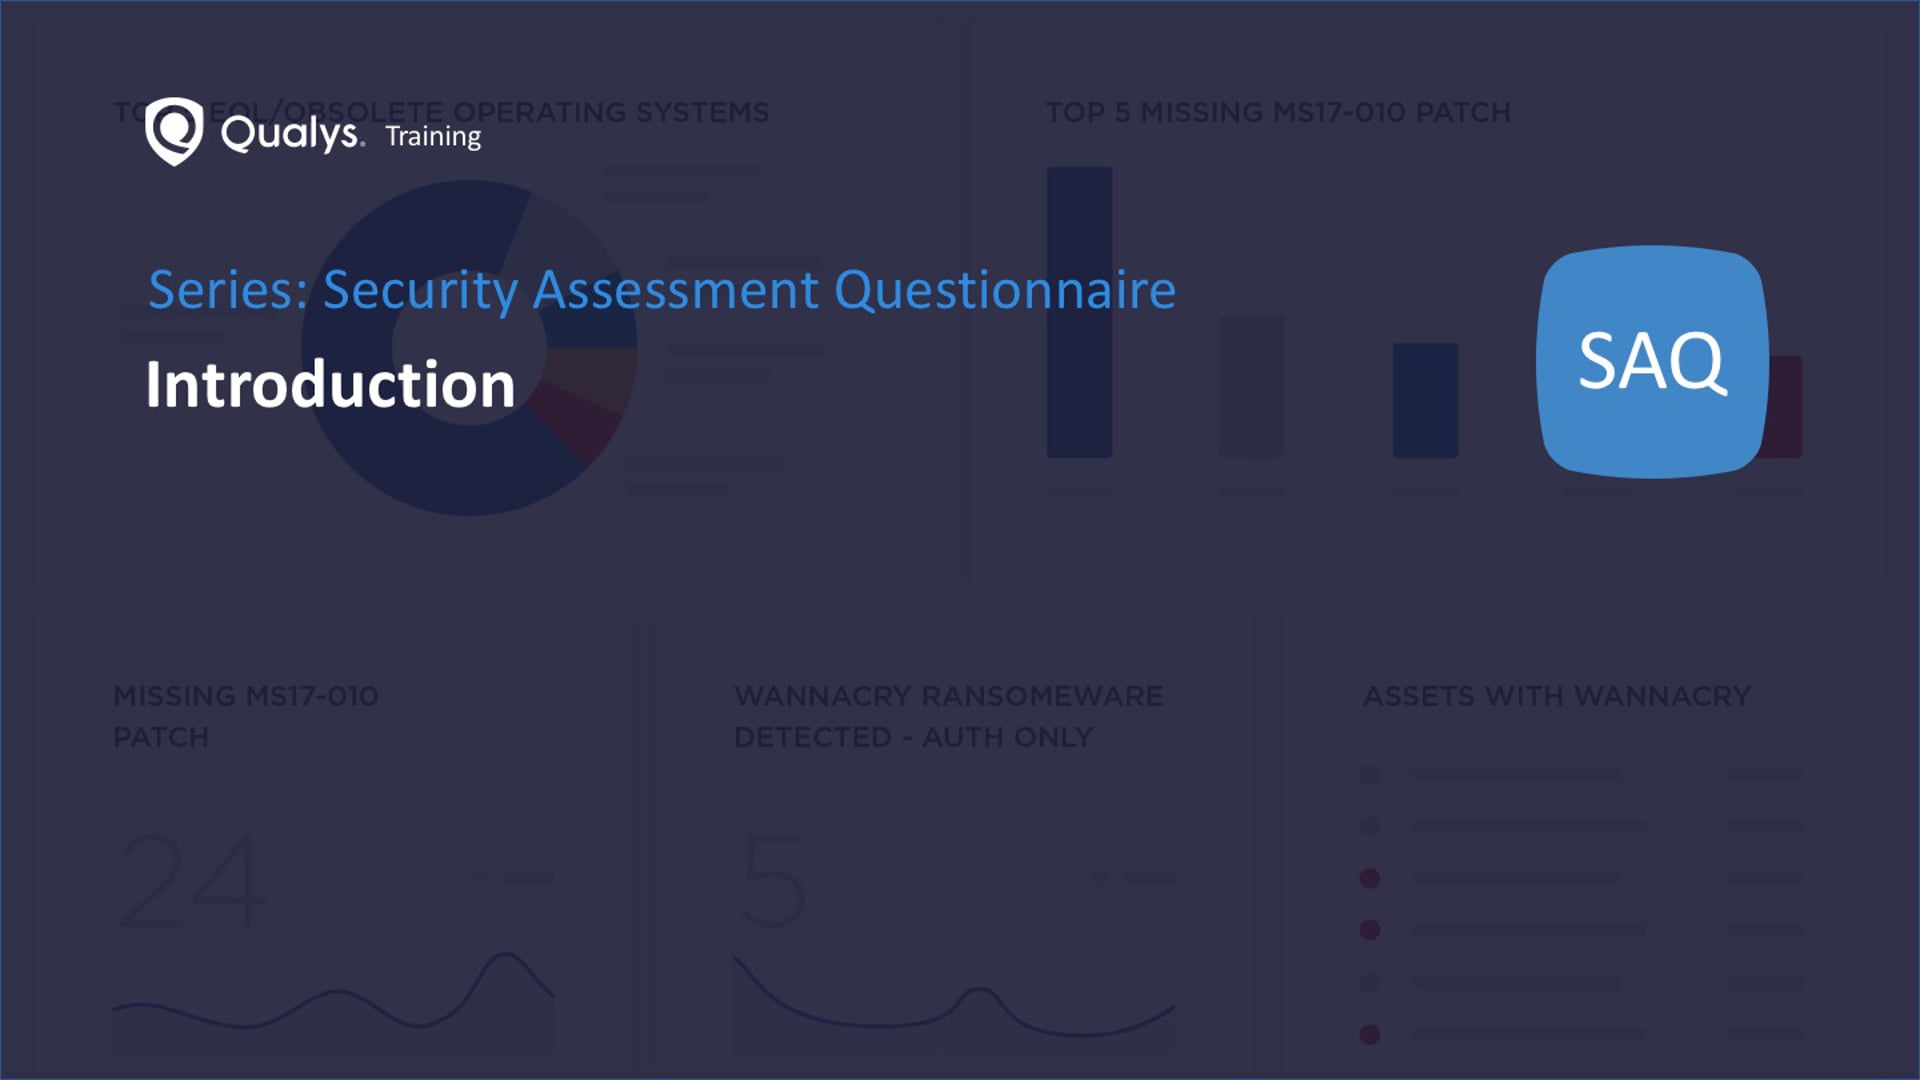 Security Assessment Questionnaire - Introduction